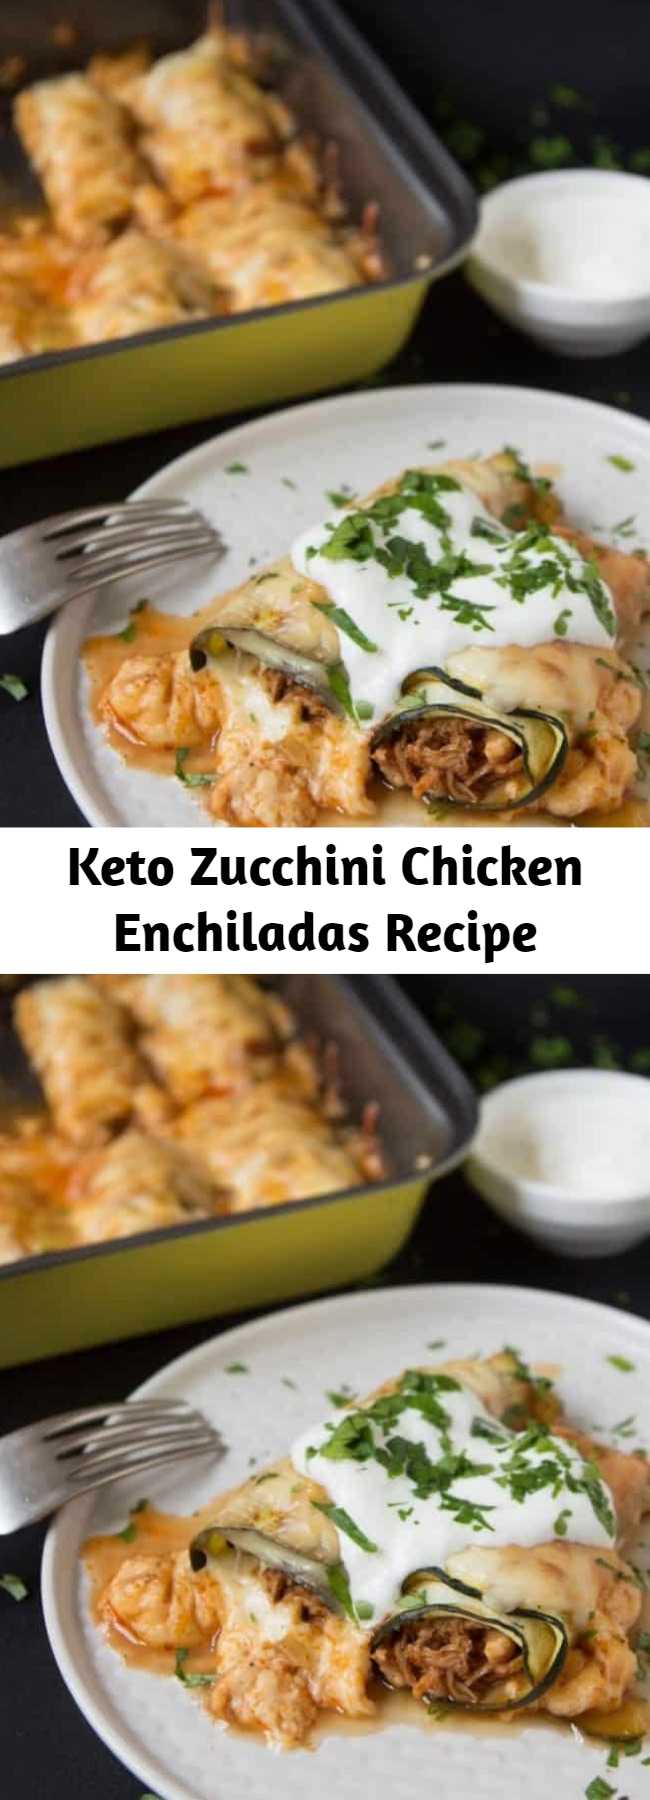 Keto Zucchini Chicken Enchiladas Recipe - This keto-friendly version of Mexican chicken enchiladas using zucchini instead of tortillas will be a tasty low-carb dinner for you and your family.